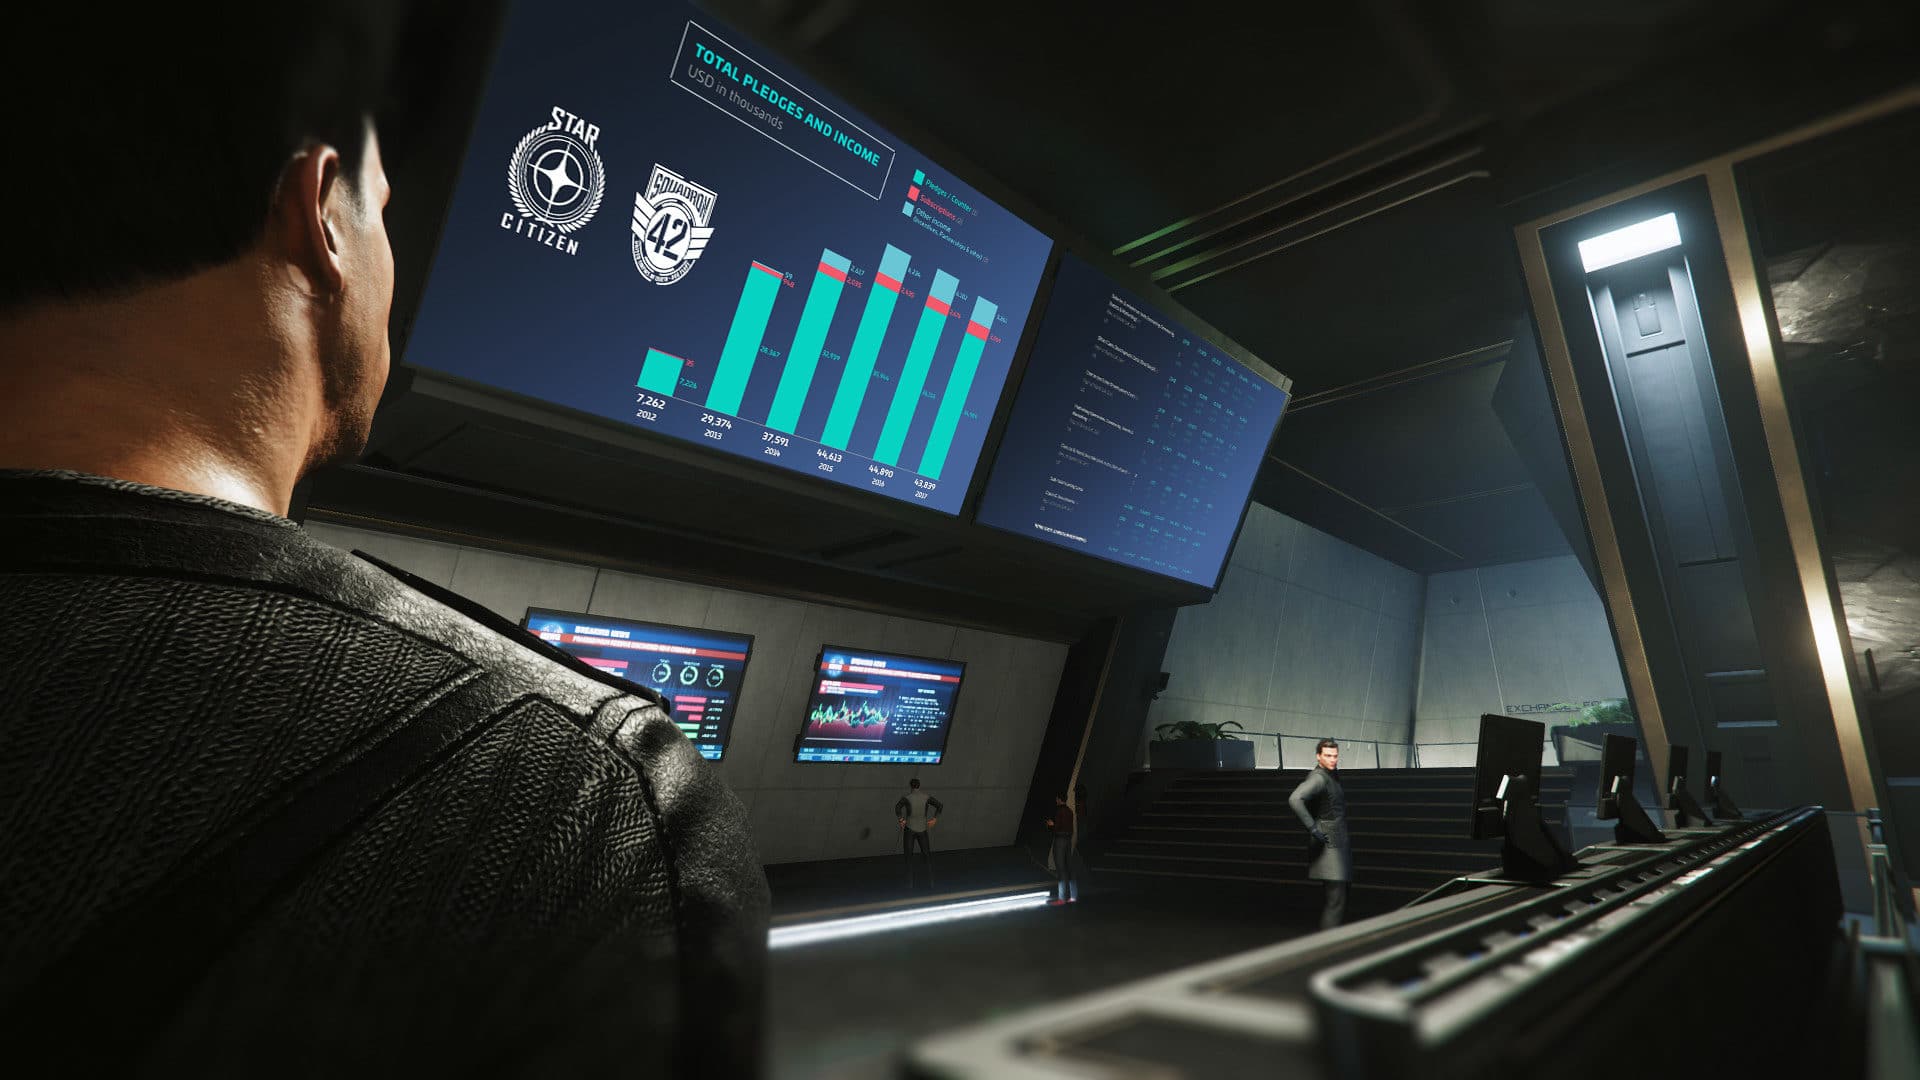 Star Citizen - Roberts Space Industries  Follow the development of Star  Citizen and Squadron 42